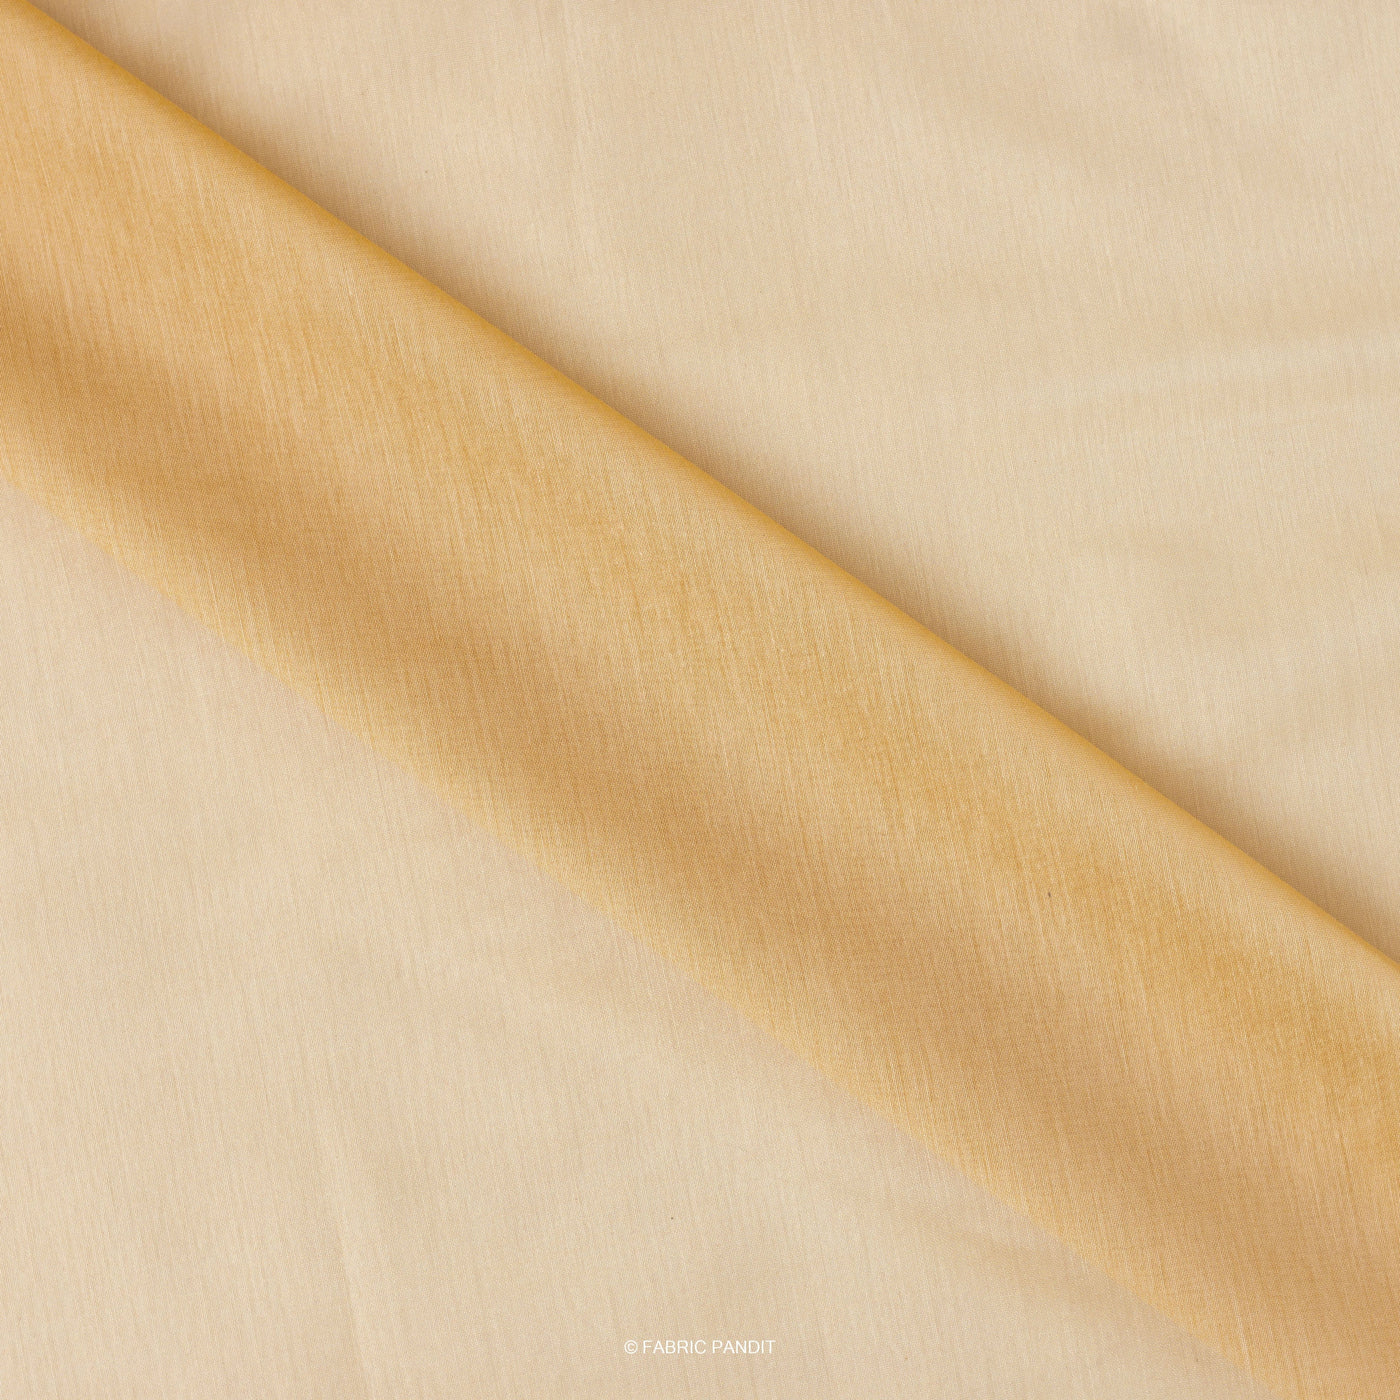 Fabric Pandit Fabric Golden Yellow Color Plain Chanderi Fabric (Width 43 Inches)